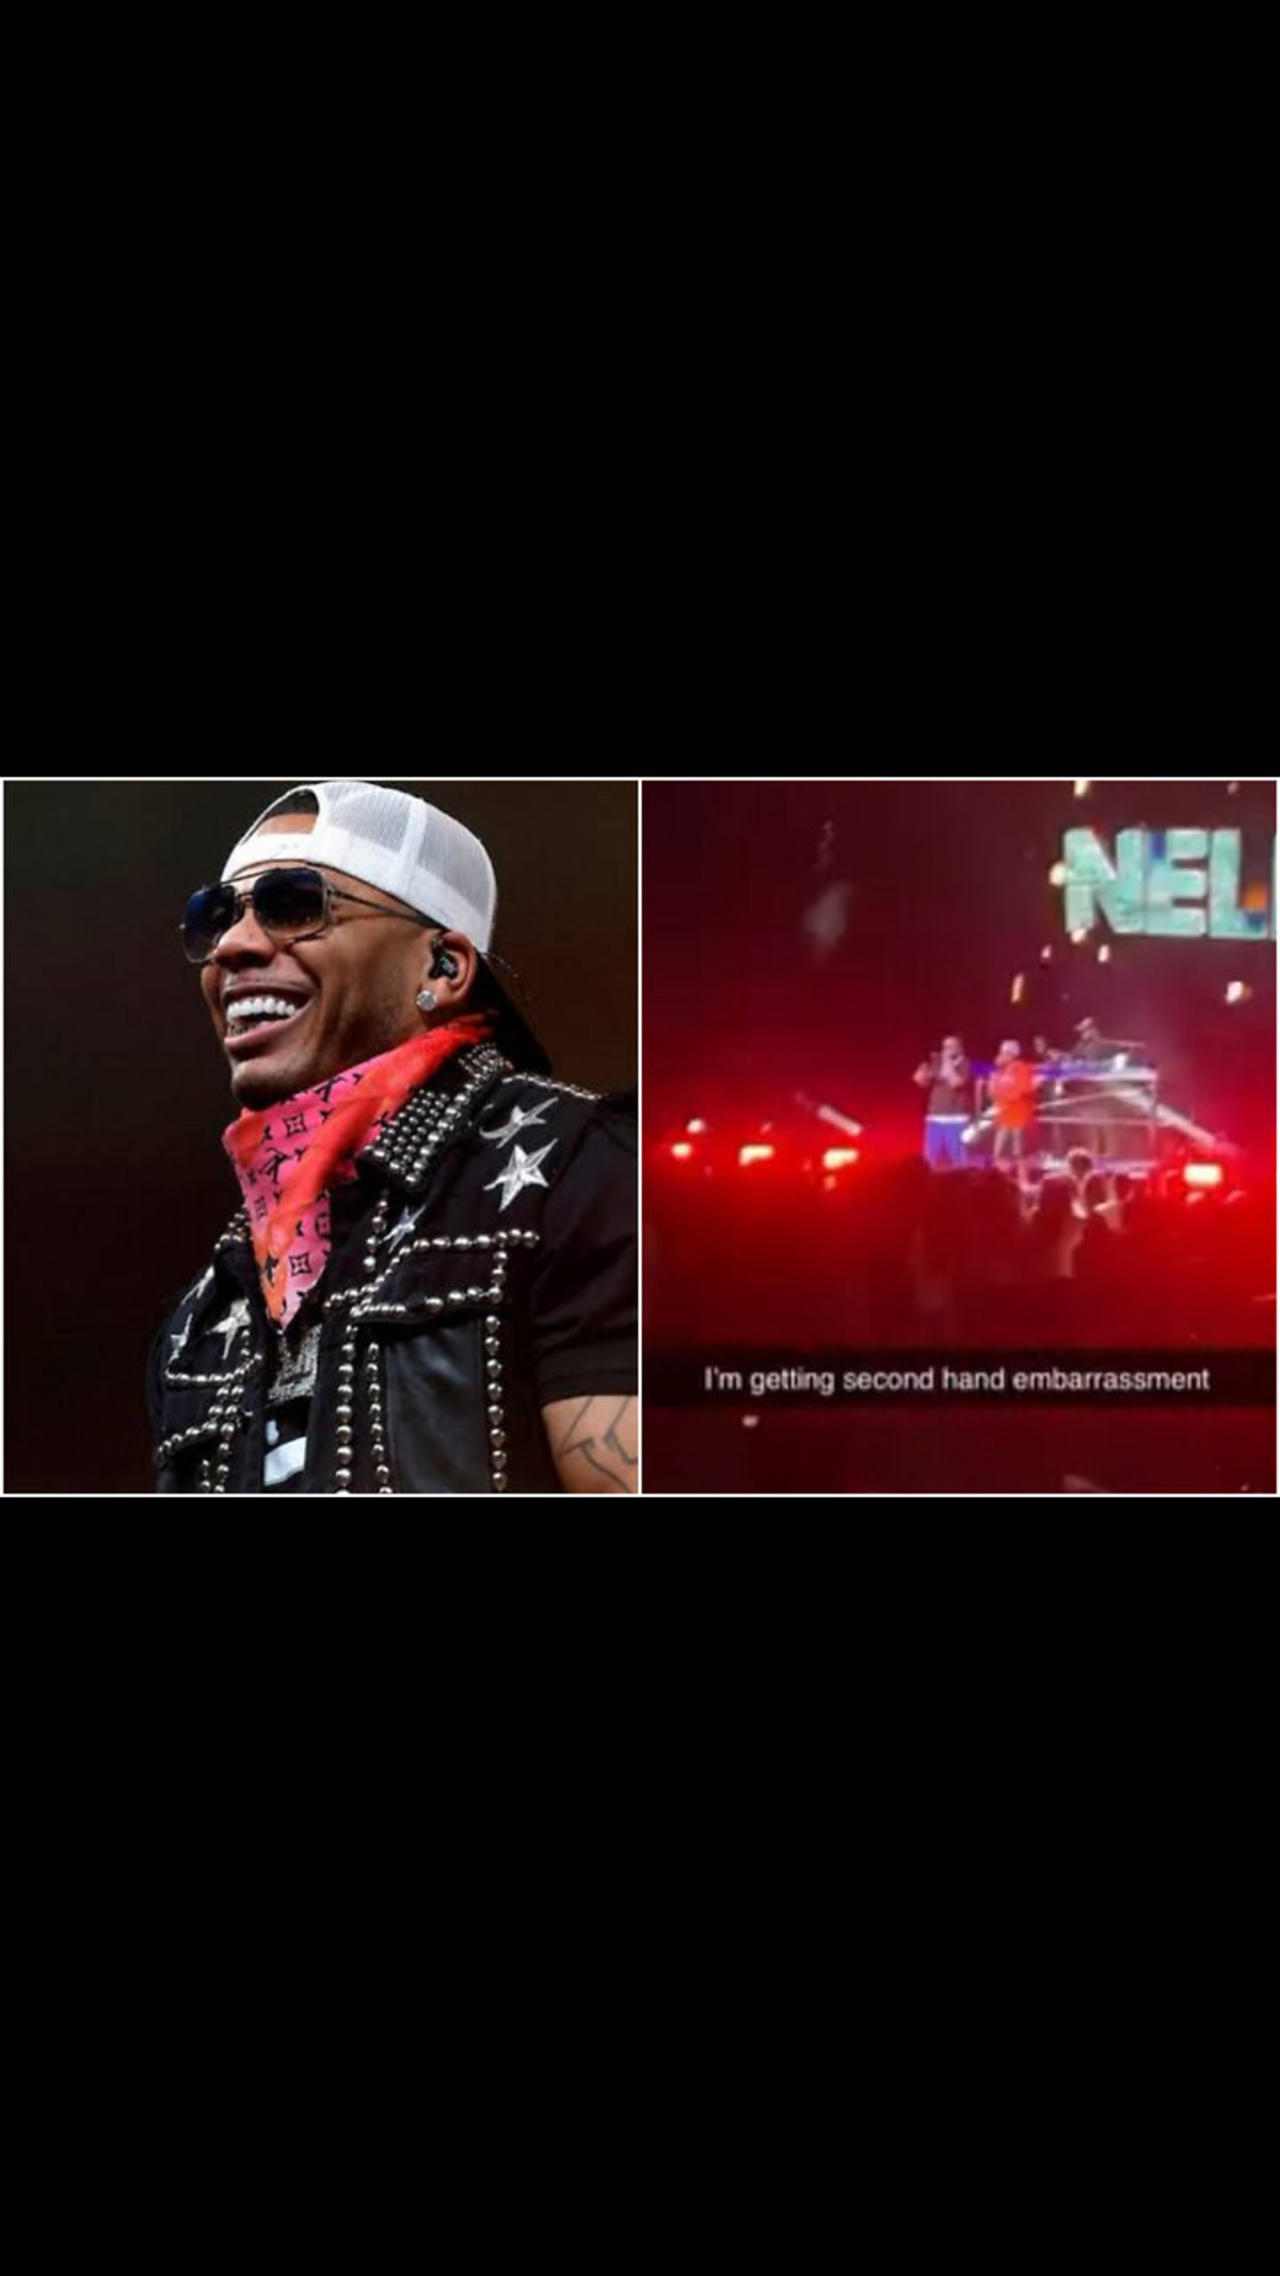 Rumors are going around that Nelly is struggling to sell tickets